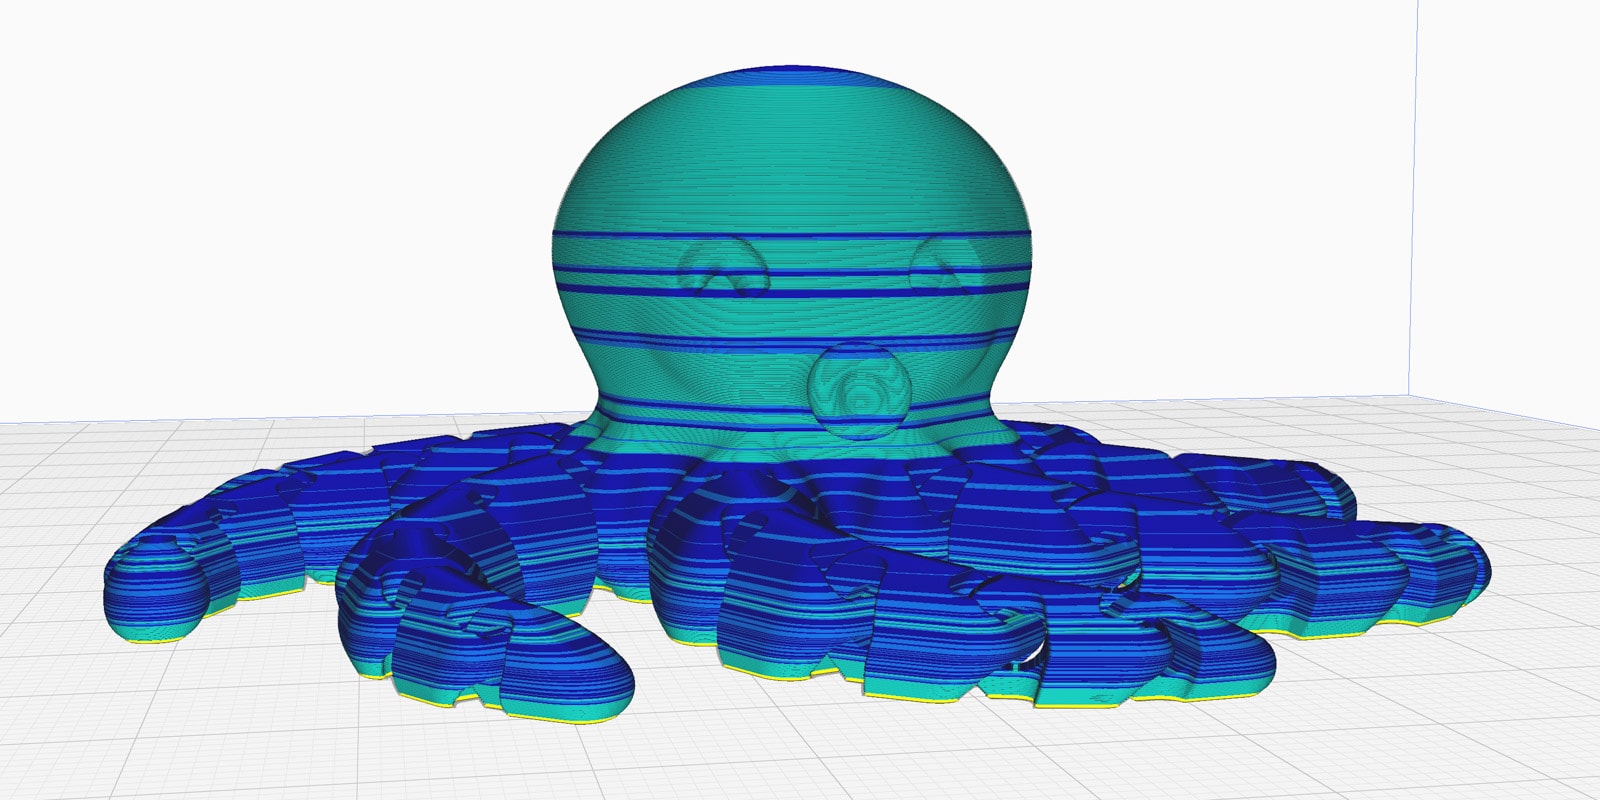 A visual representation of Cura's Adaptive Layers function that shows a variable layer height on a sliced 3D model.